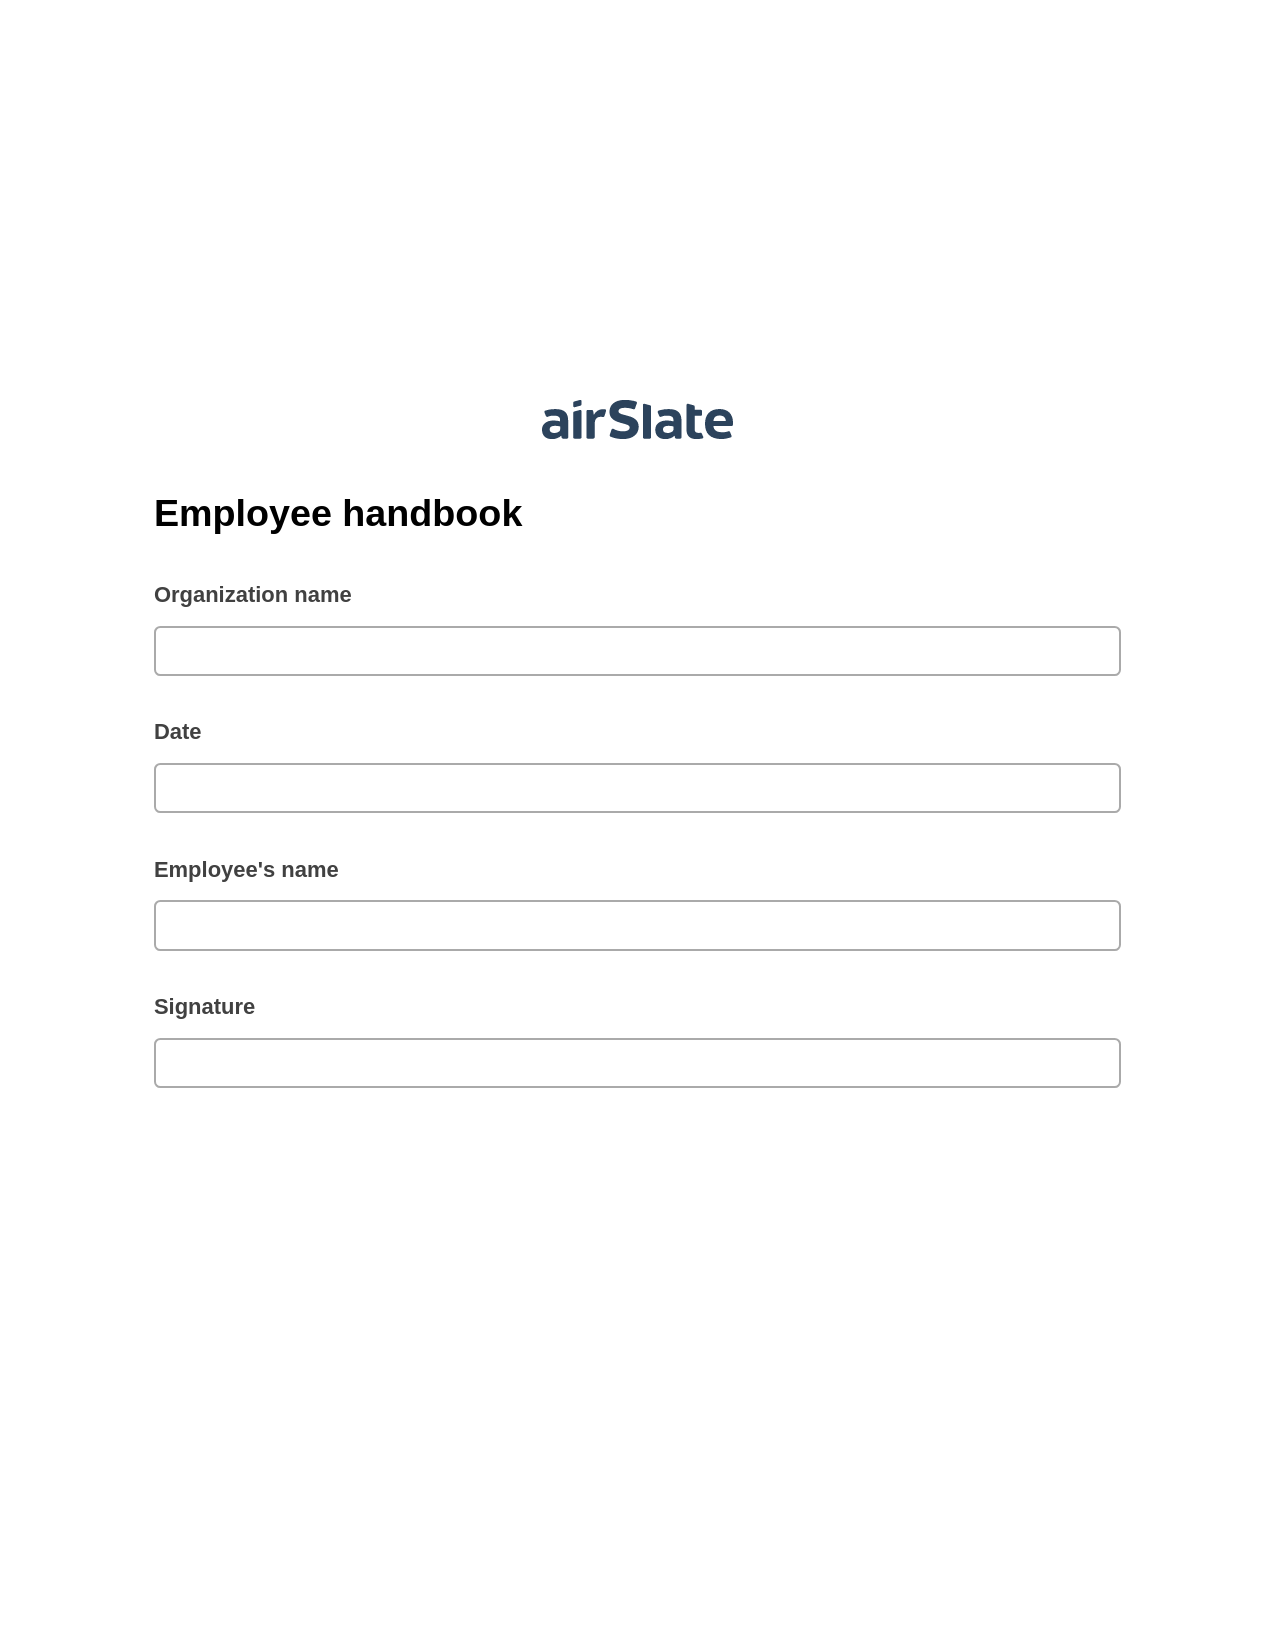 Multirole Employee handbook Pre-fill from Salesforce Records with SOQL Bot, Email Notification Bot, Export to Excel 365 Bot